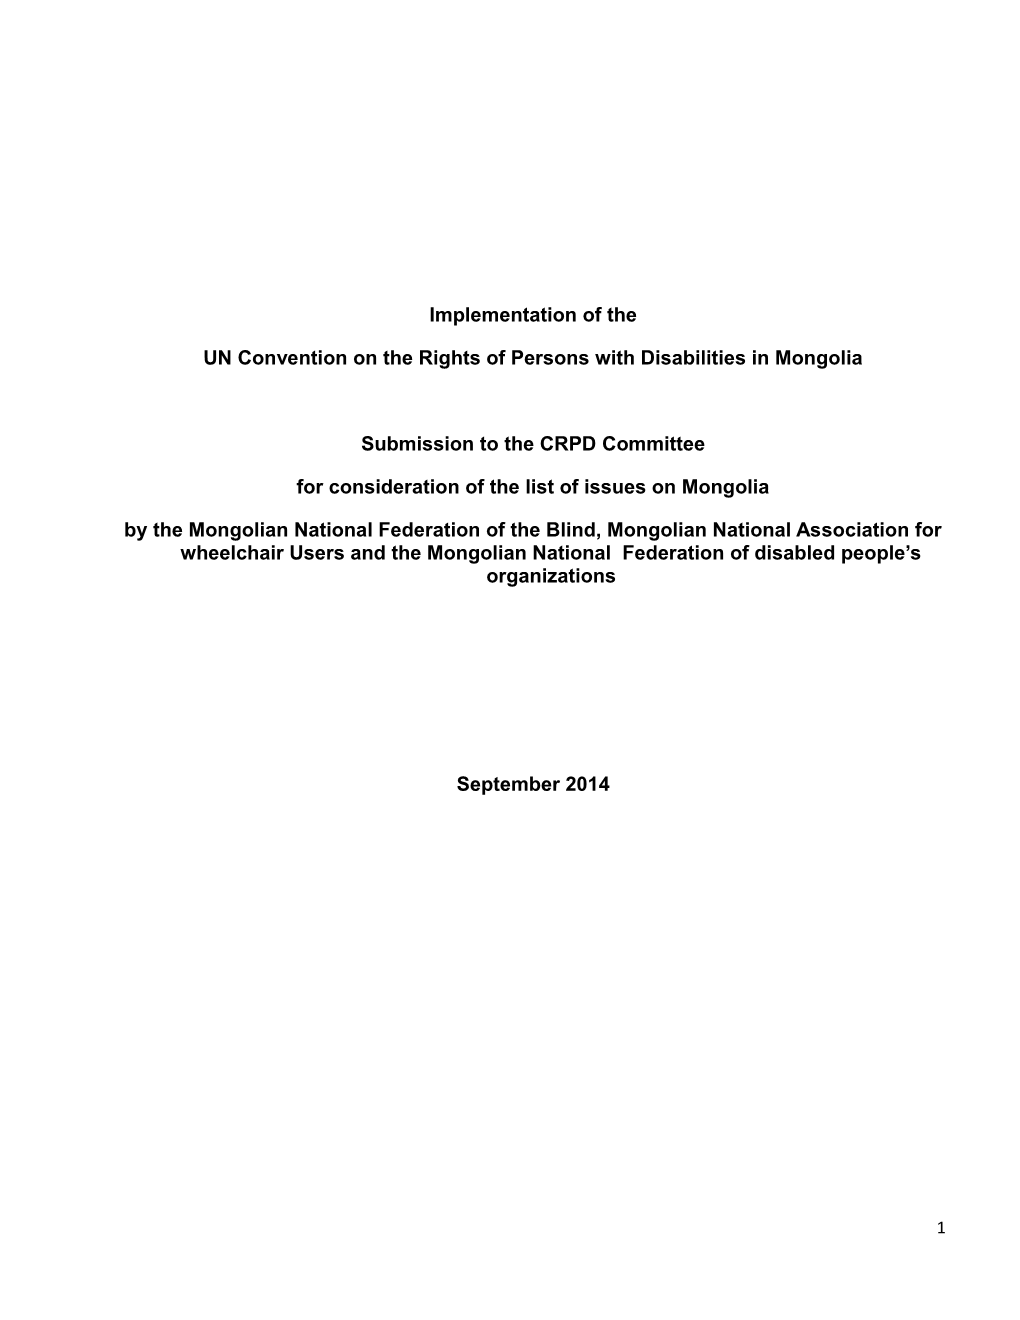 UN Convention on the Rights of Persons with Disabilities in Mongolia